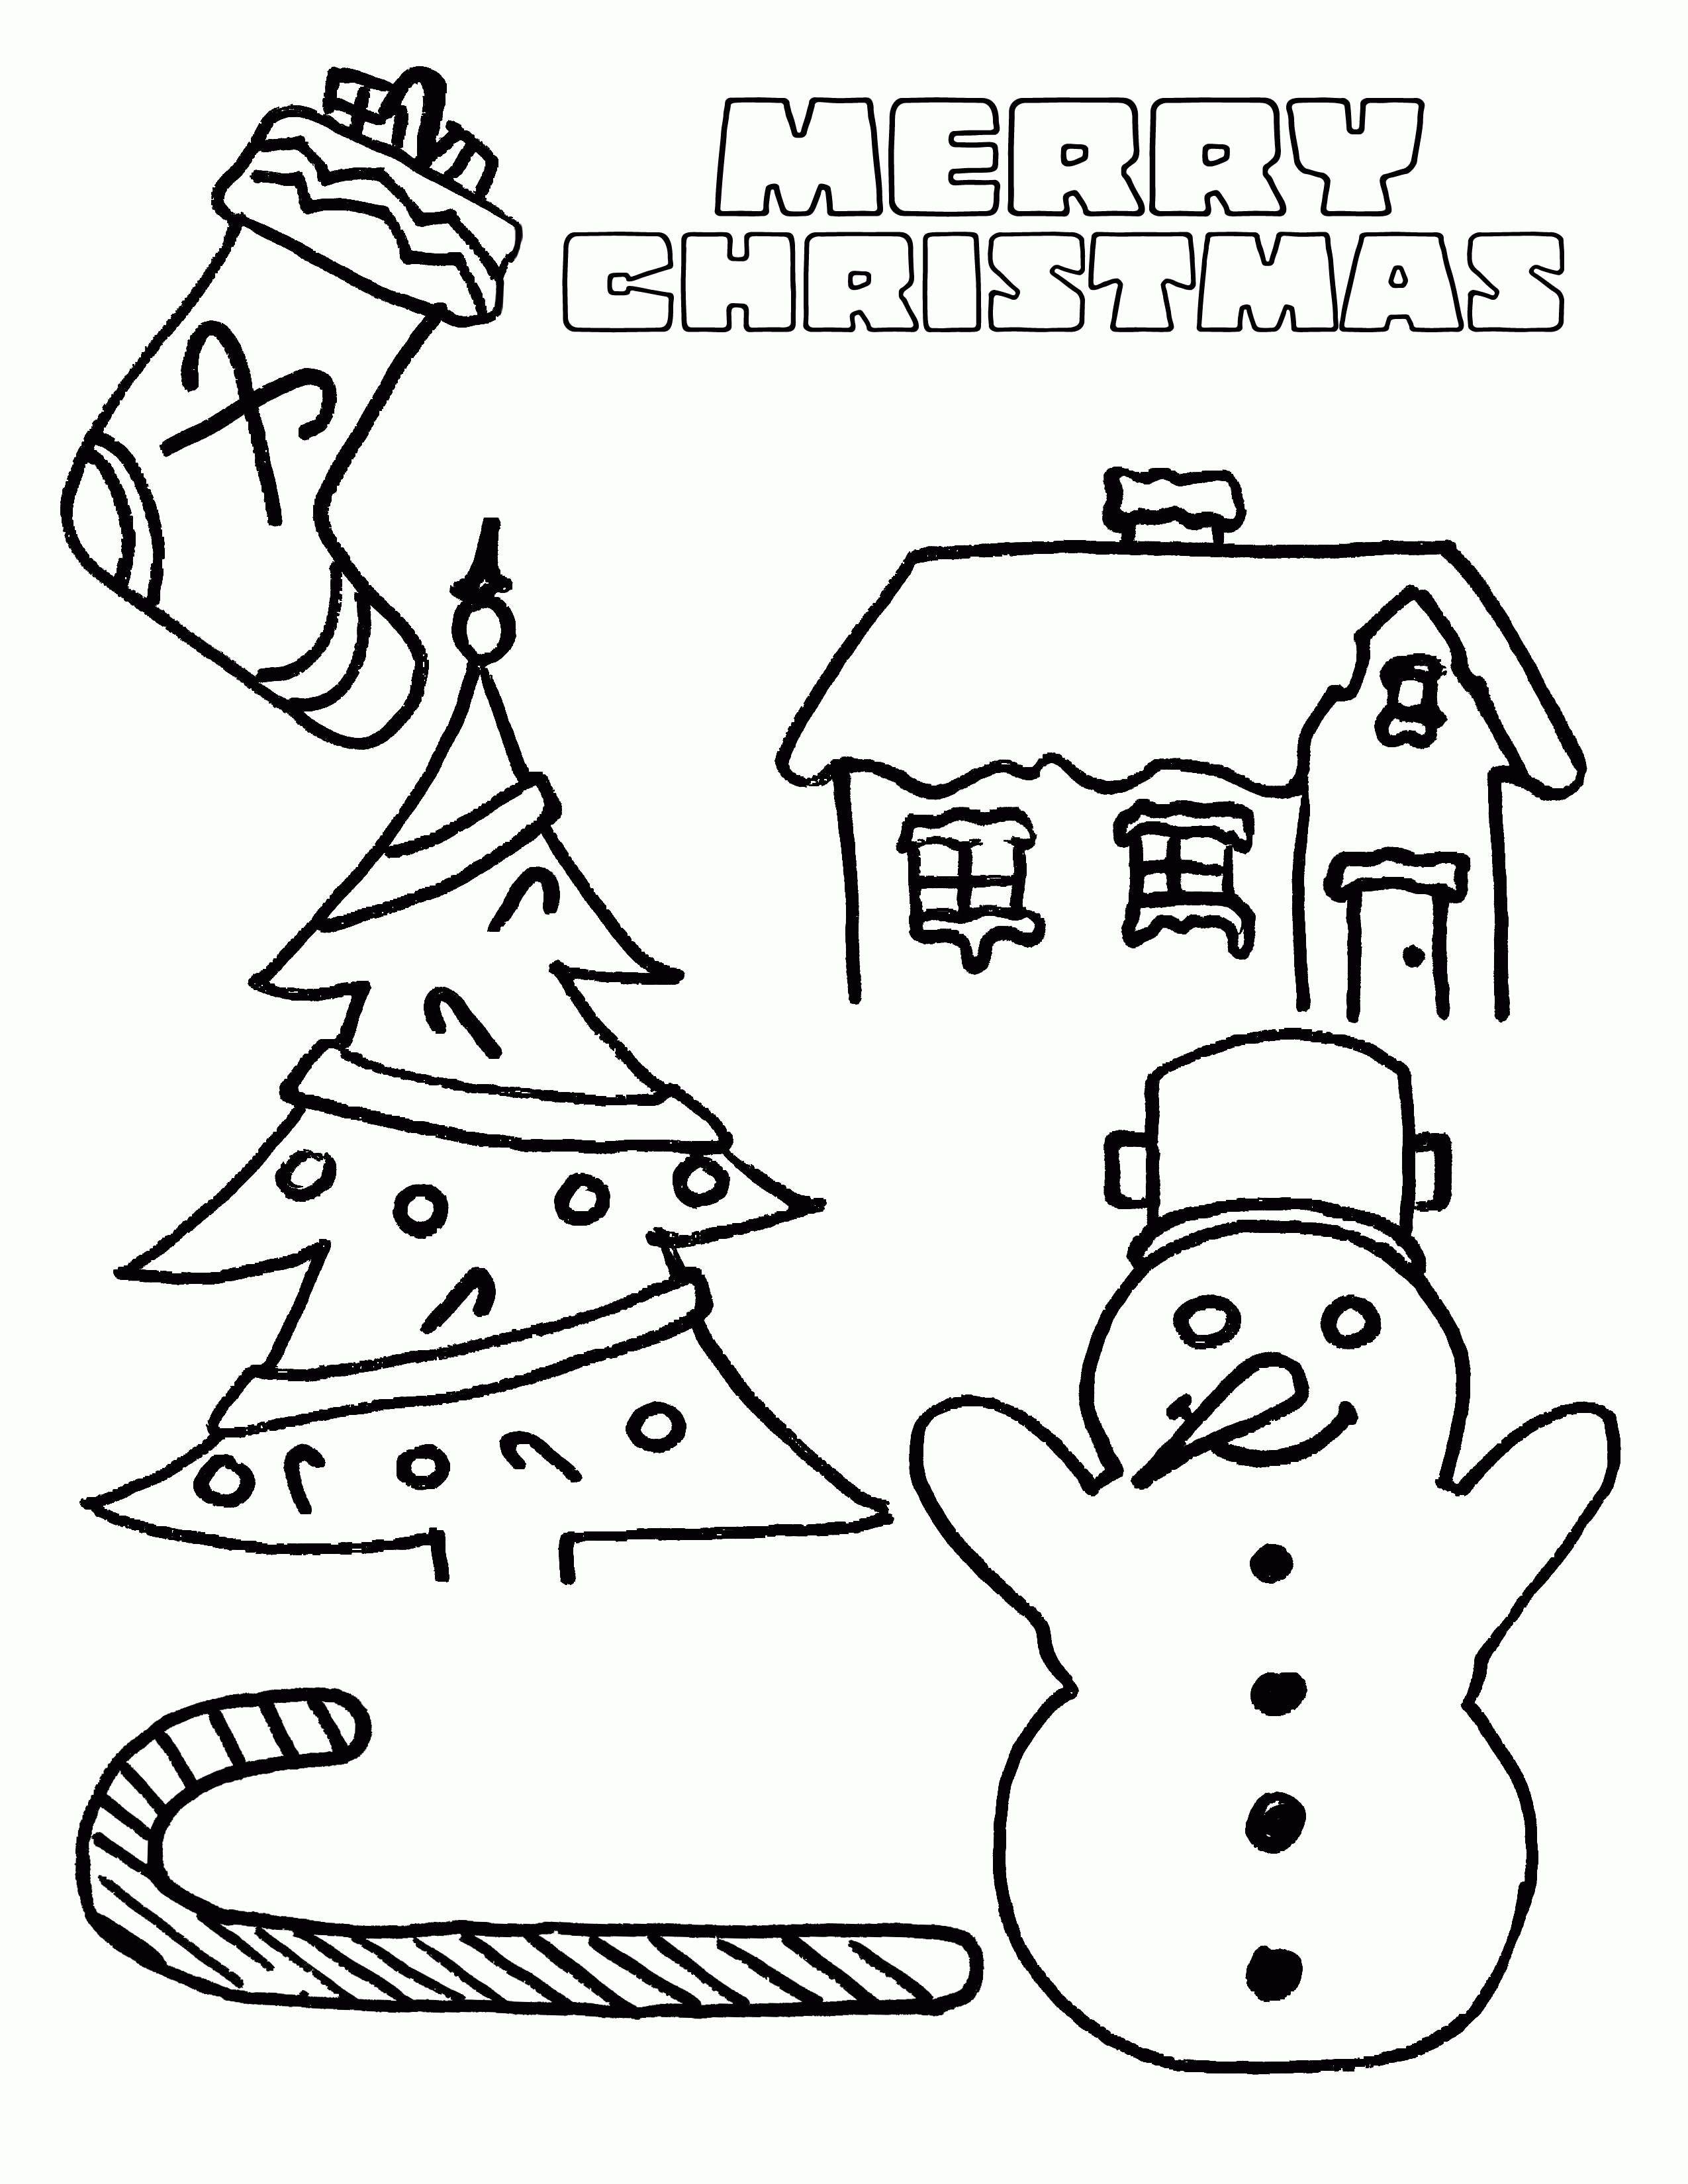 Merry Christmas Coloring Pages For Kids Free | Christmas Coloring ...